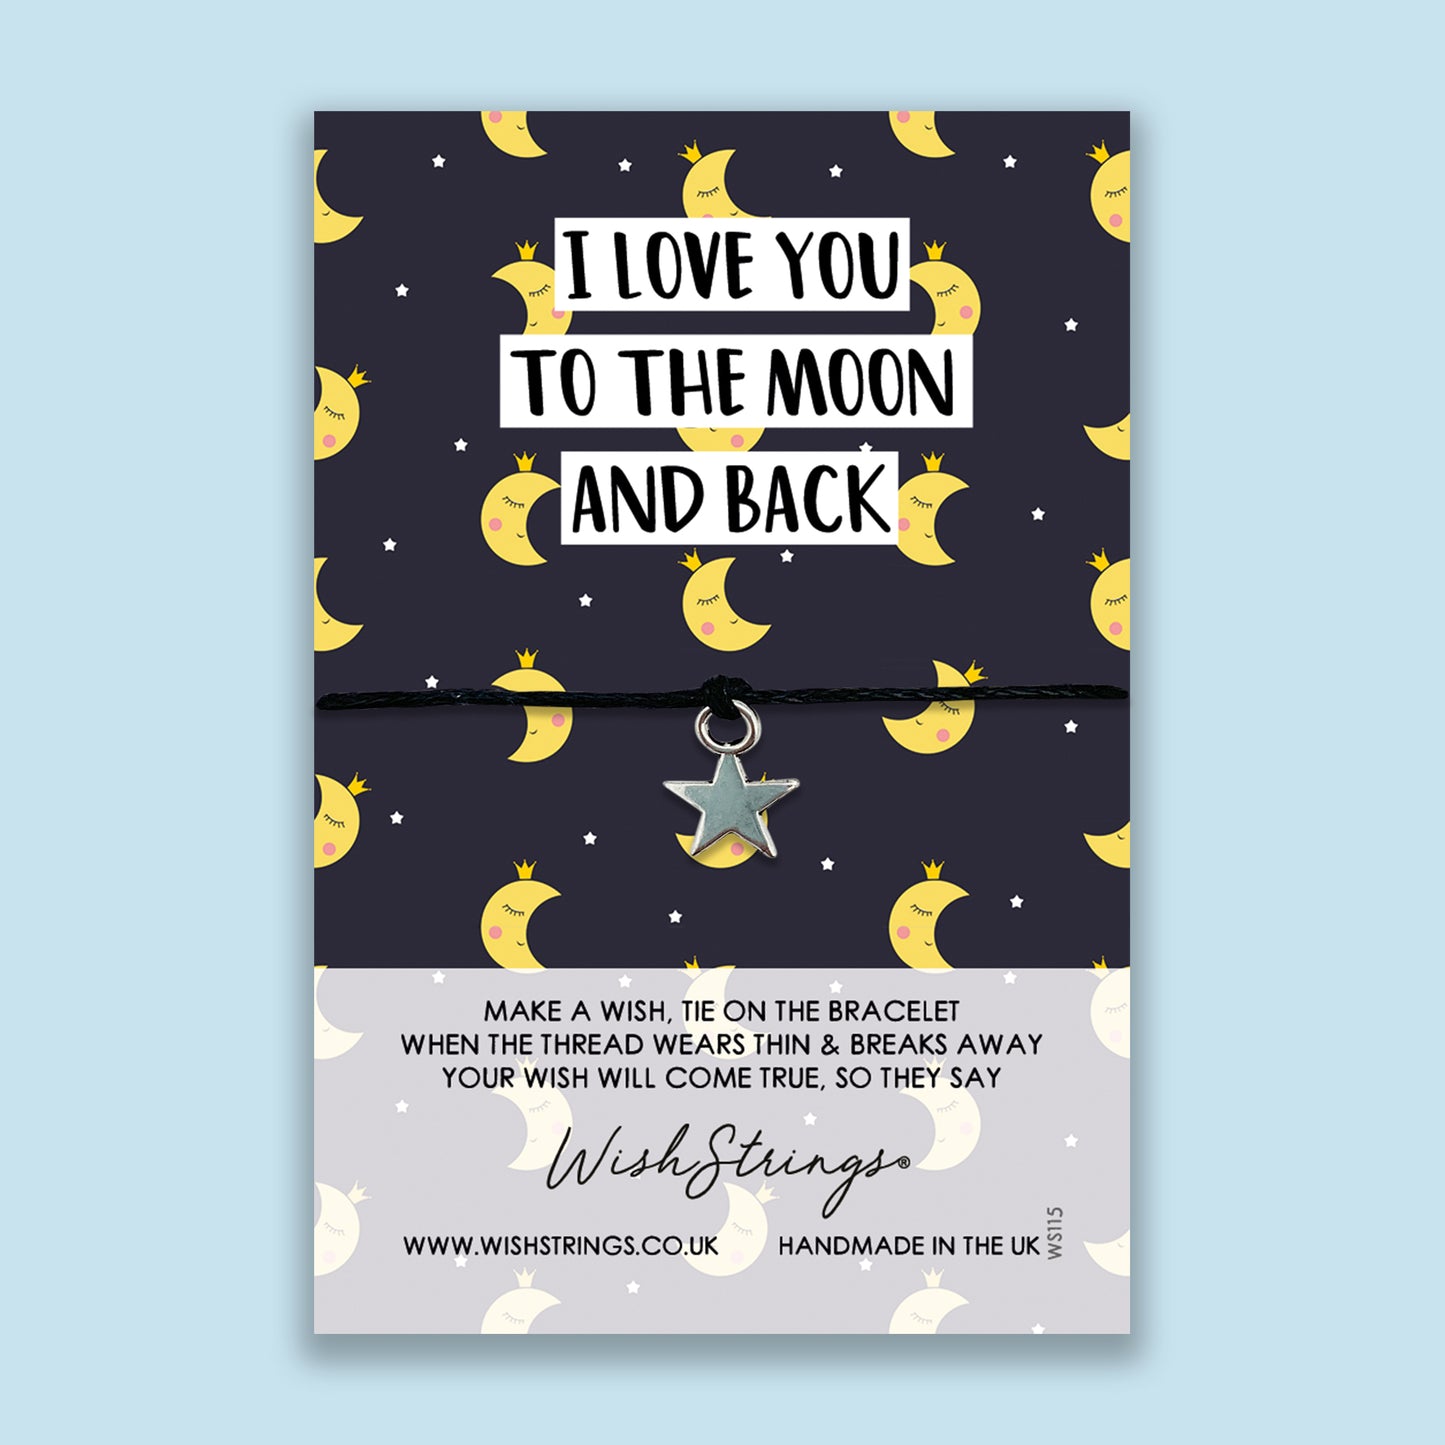 i love you to the moon and back WishStrings wish bracelet